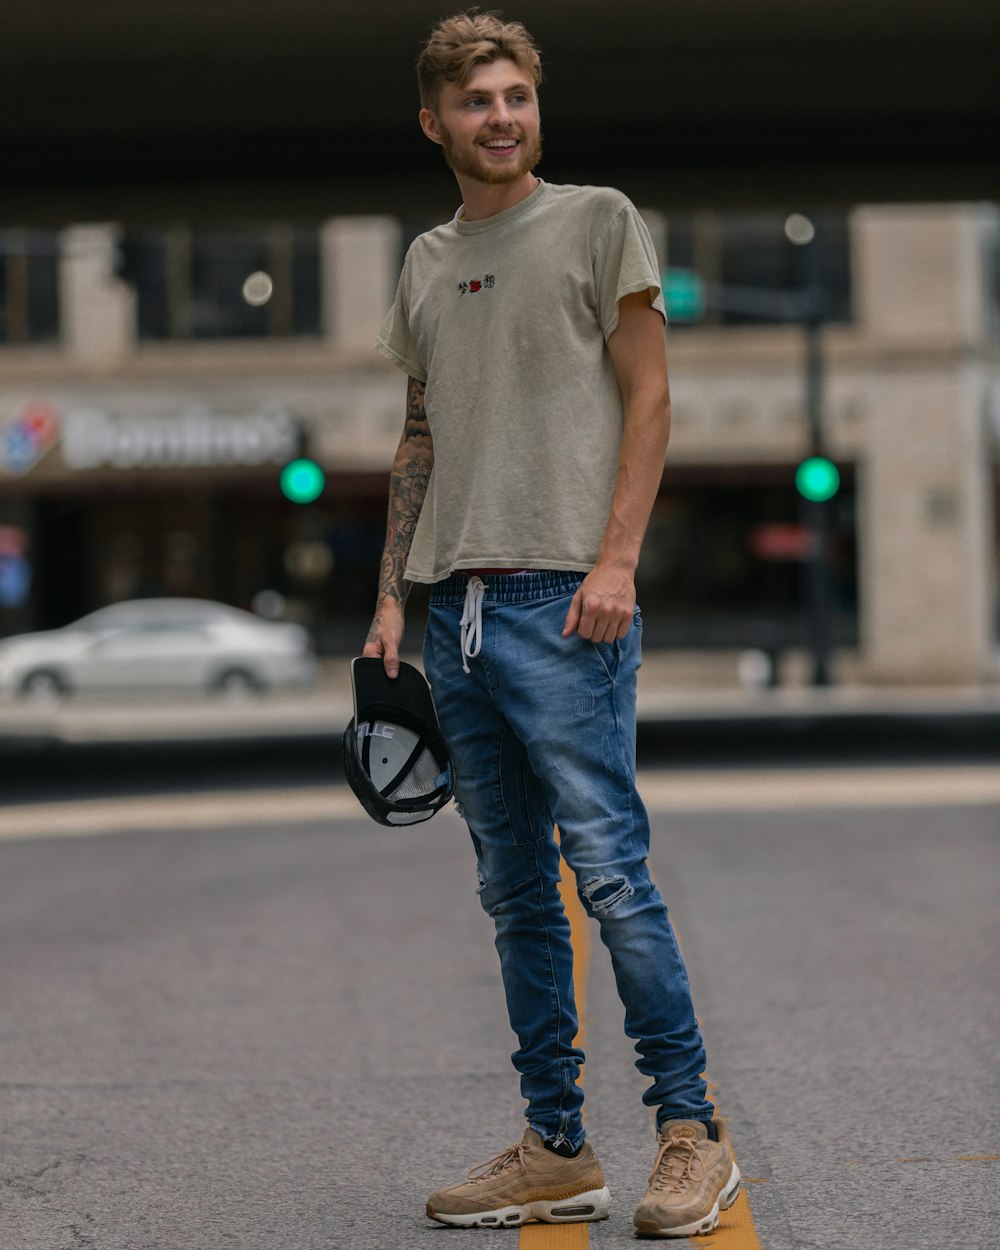 man in gray crew neck t-shirt and blue denim jeans standing on road during daytime